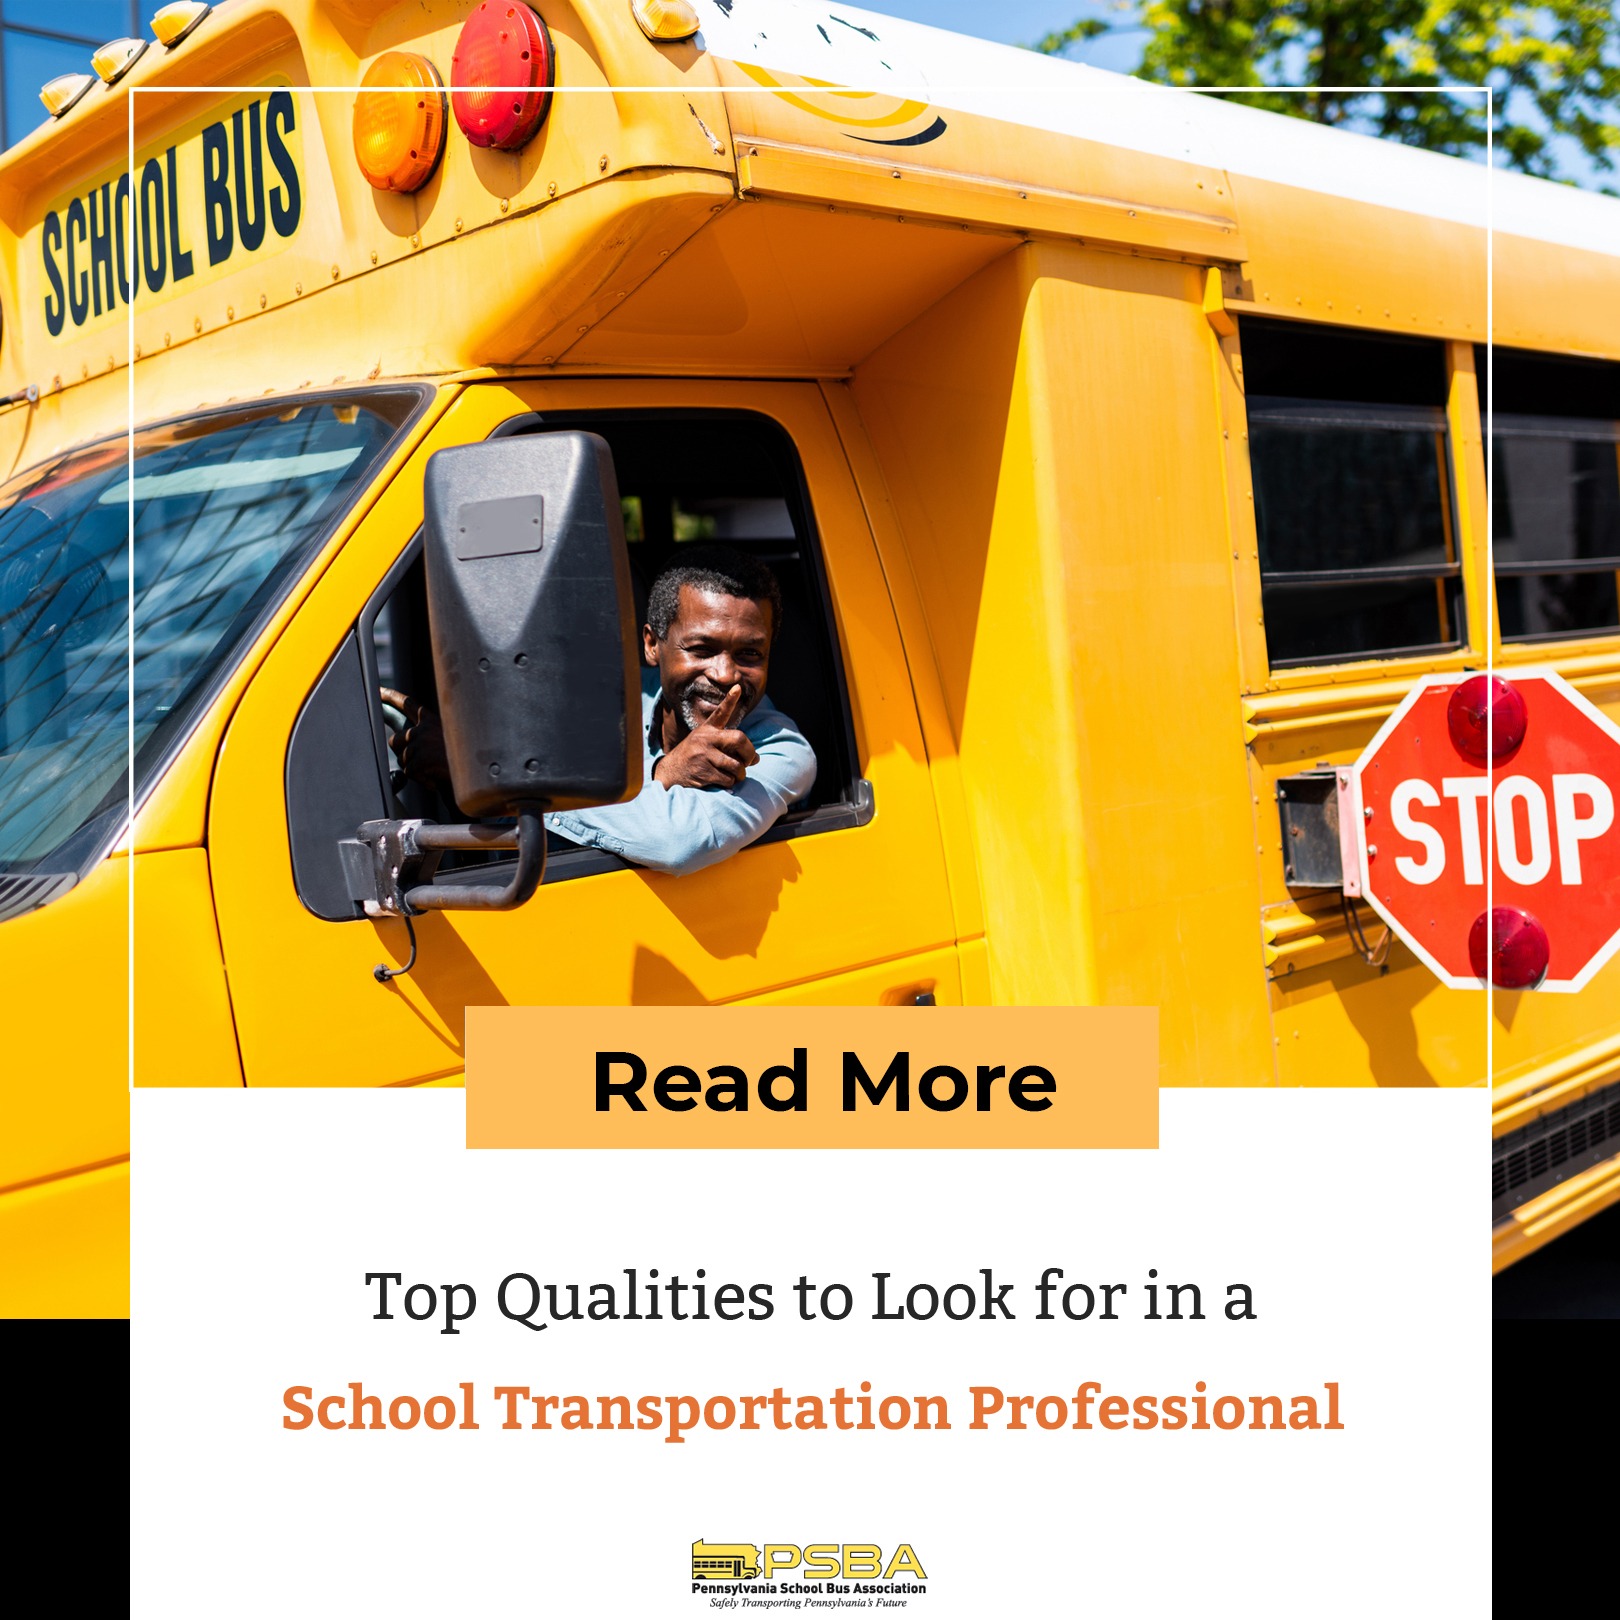 Top Qualities to Look for in a School Transportation Professional